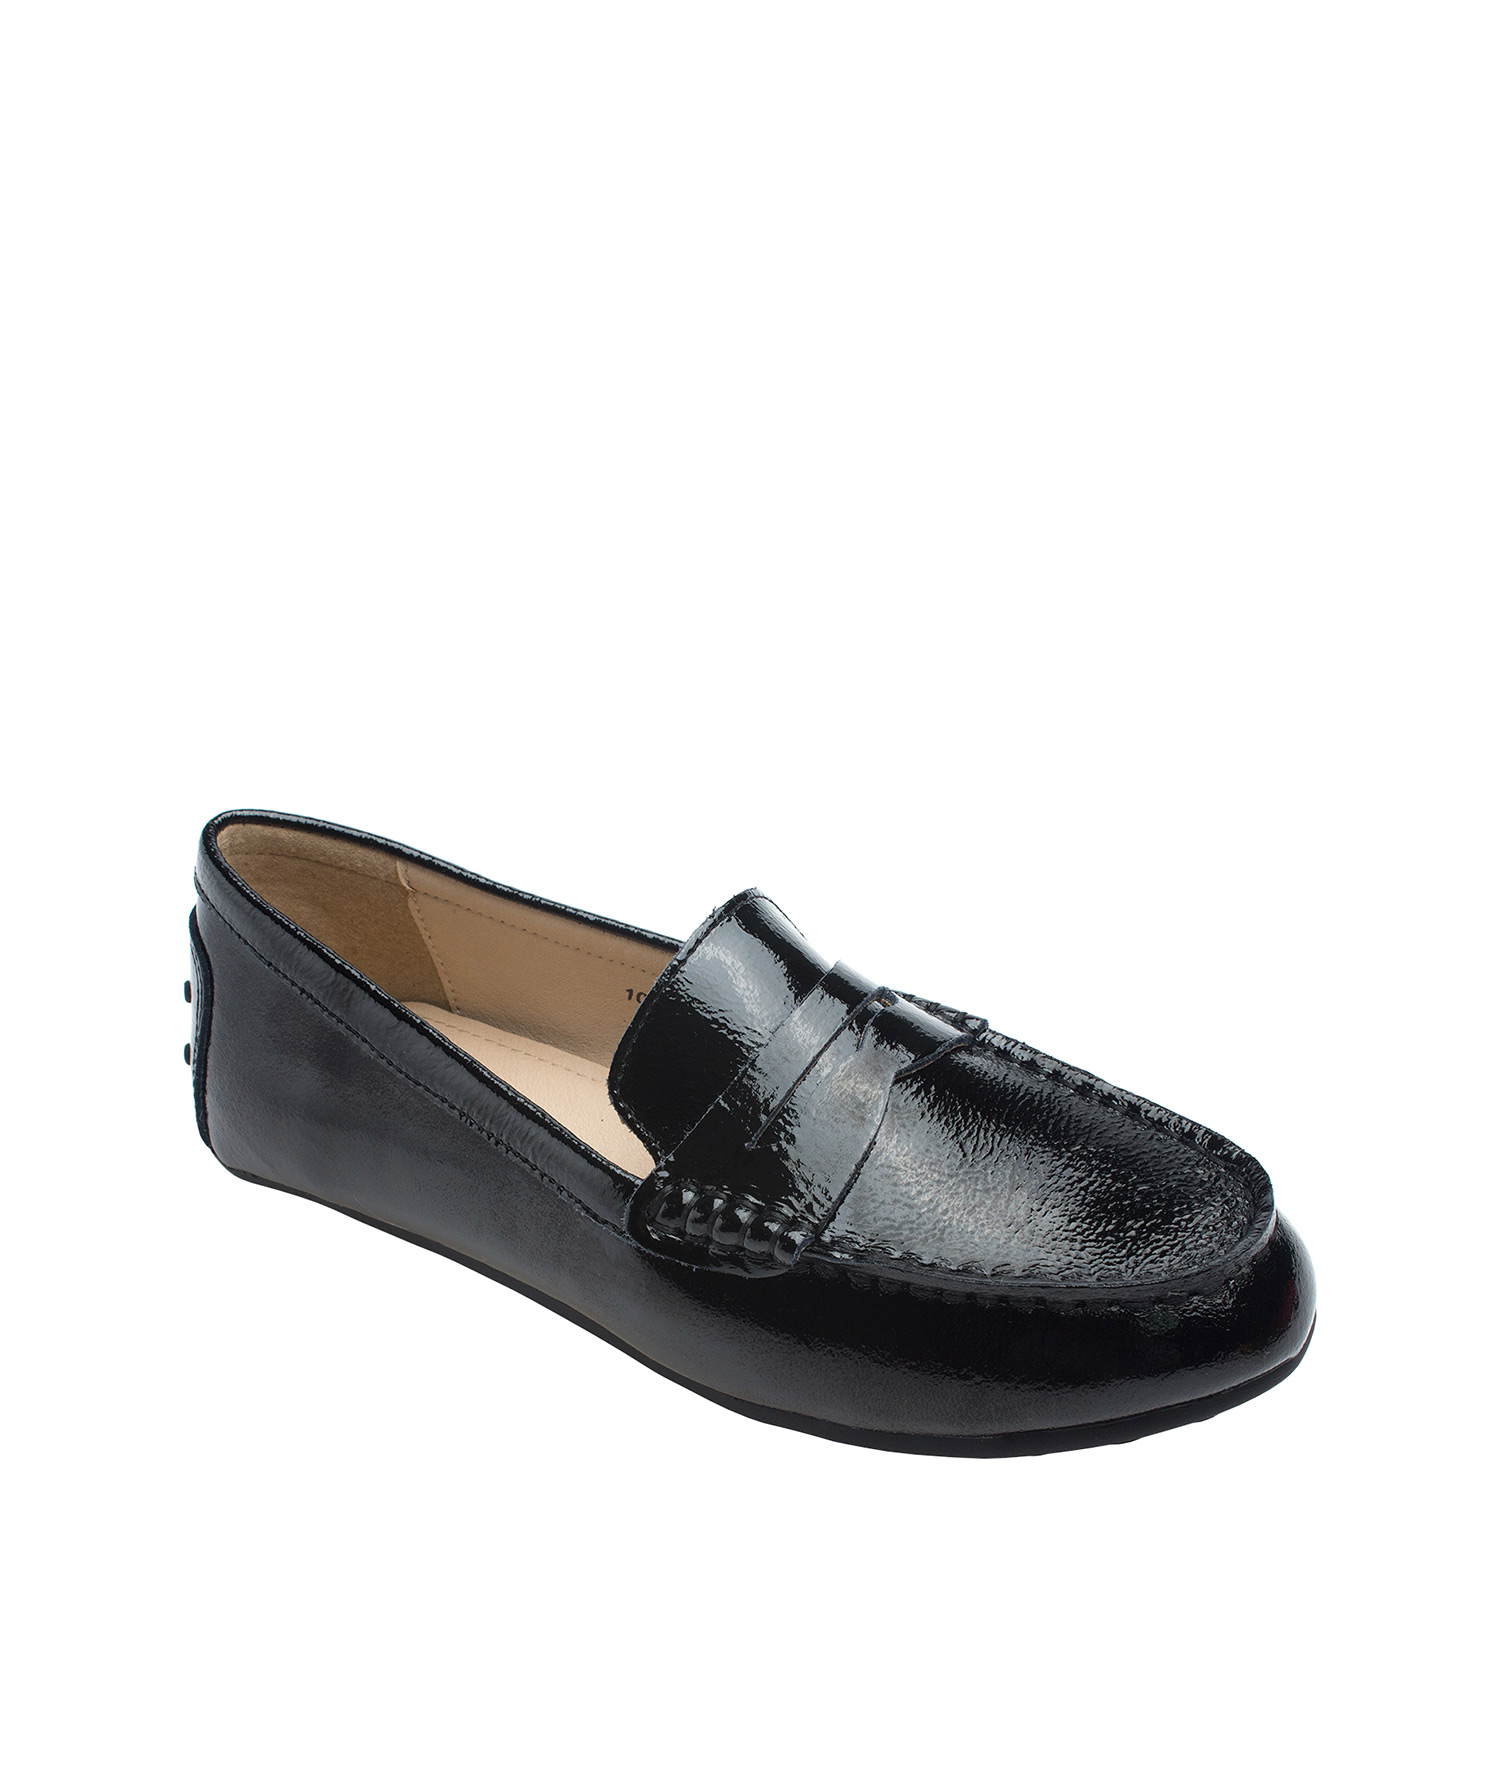 penny loafer driving moc